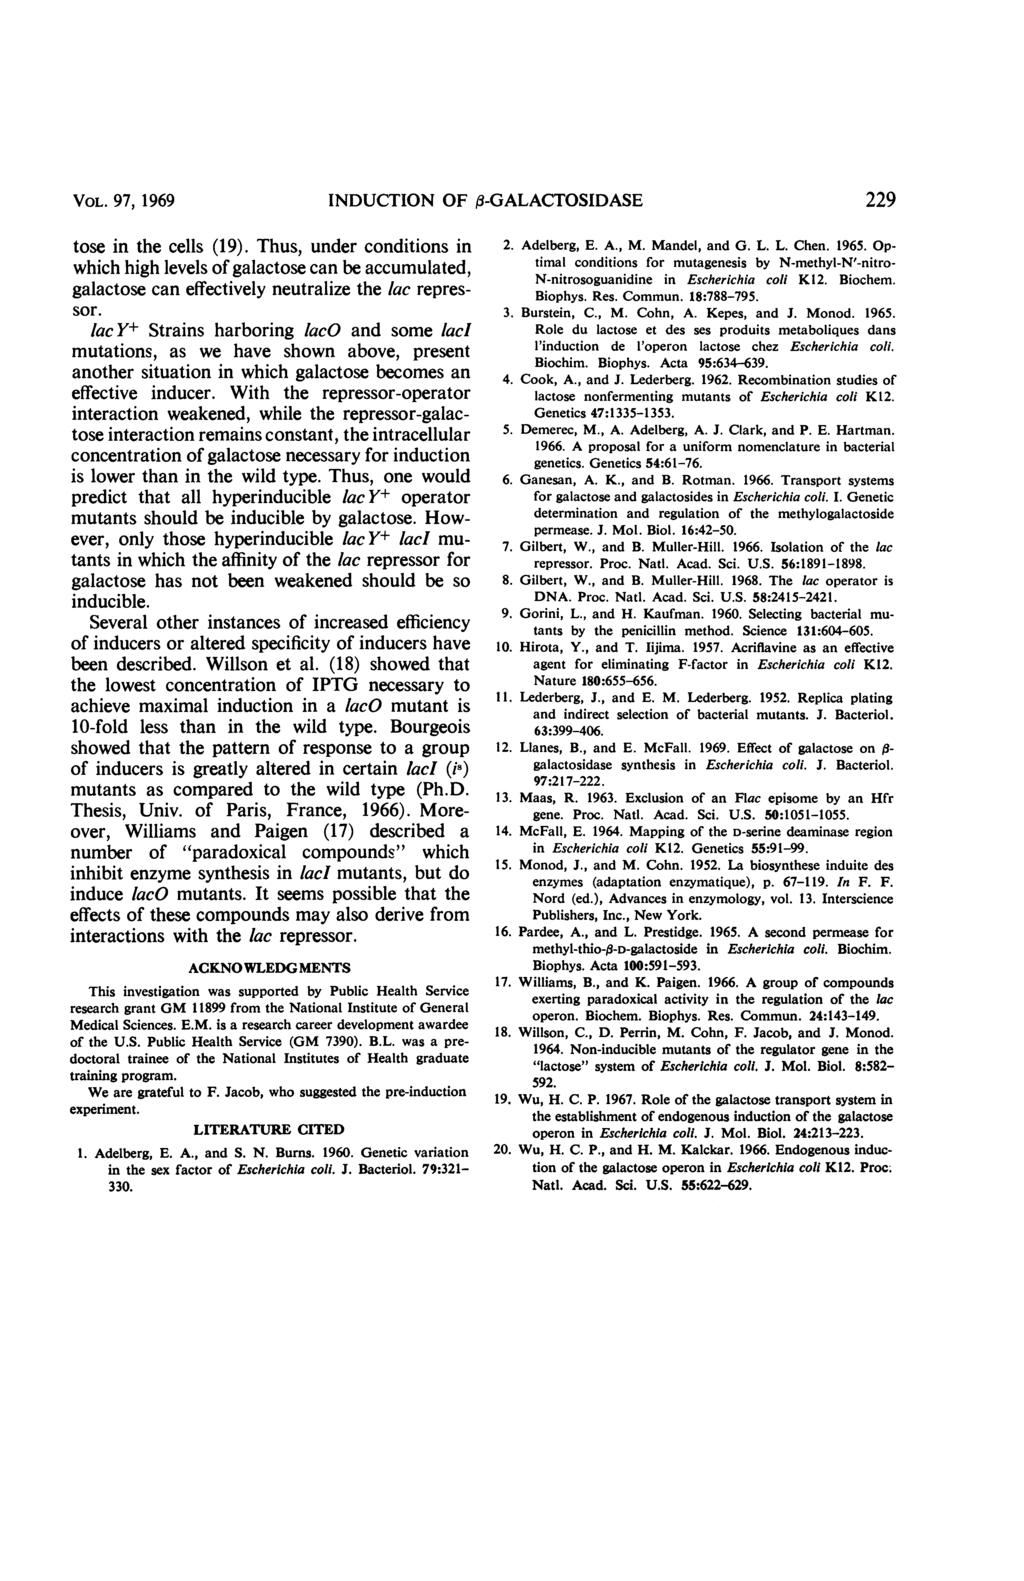 VOL. 97, 1969 NDUCTON OF 3-GALACTOSDASE 229 tose in the cells (19). Thus, under conditions in which high levels of galactose can be accumulated, galactose can effectively neutralize the lac repressor.